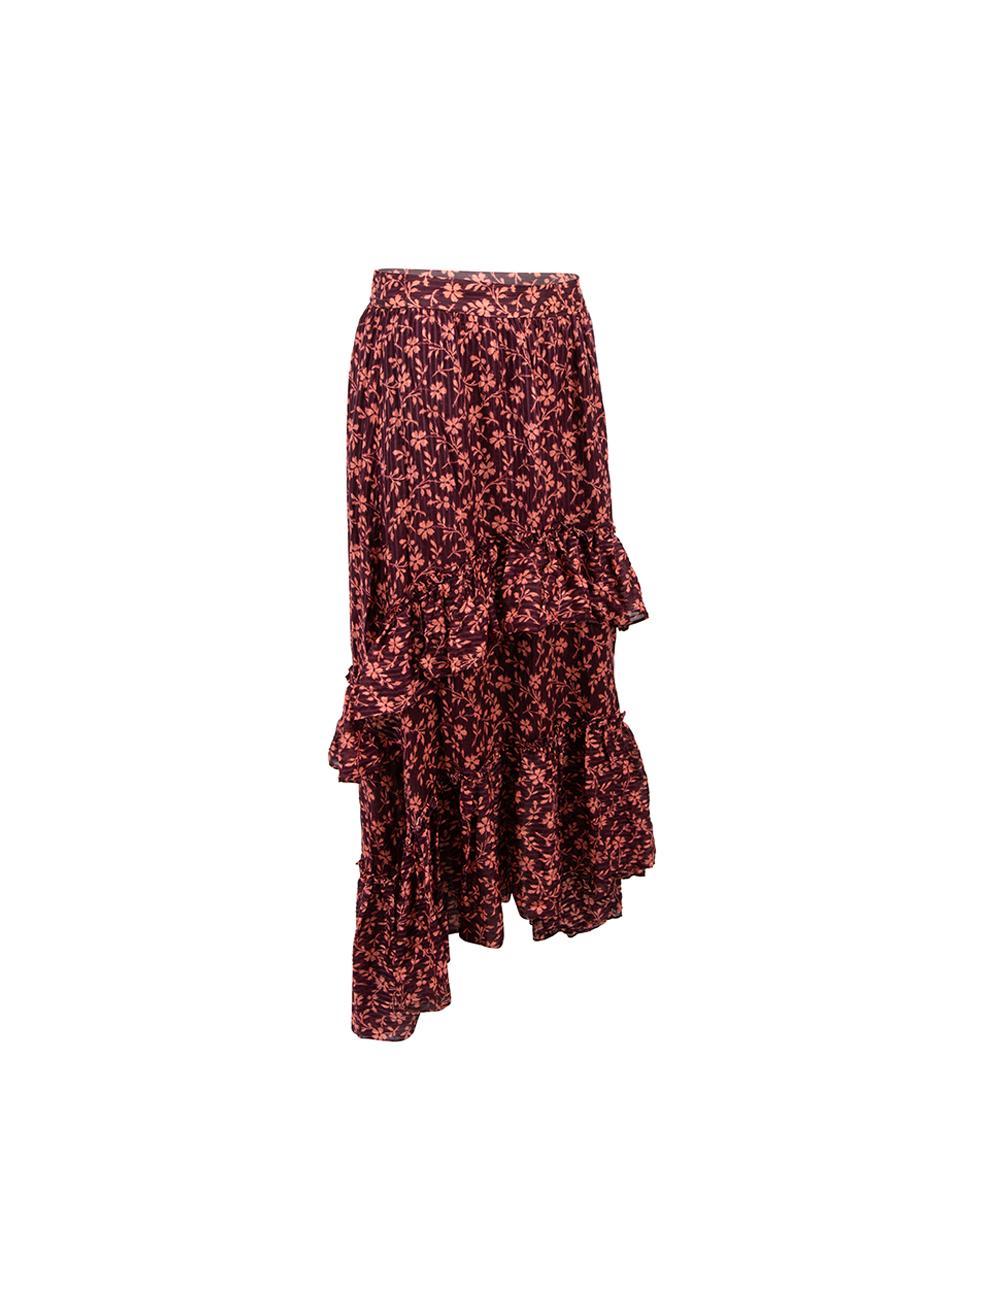 CONDITION is Very good. Hardly any visible wear to top is evident on this used Ulla Johnson designer resale item.



Details


Burgundy

Cotton

Midi tiered dress

Floral pattern

Ruffles accent

Side zip closure

High low hemline





Made in